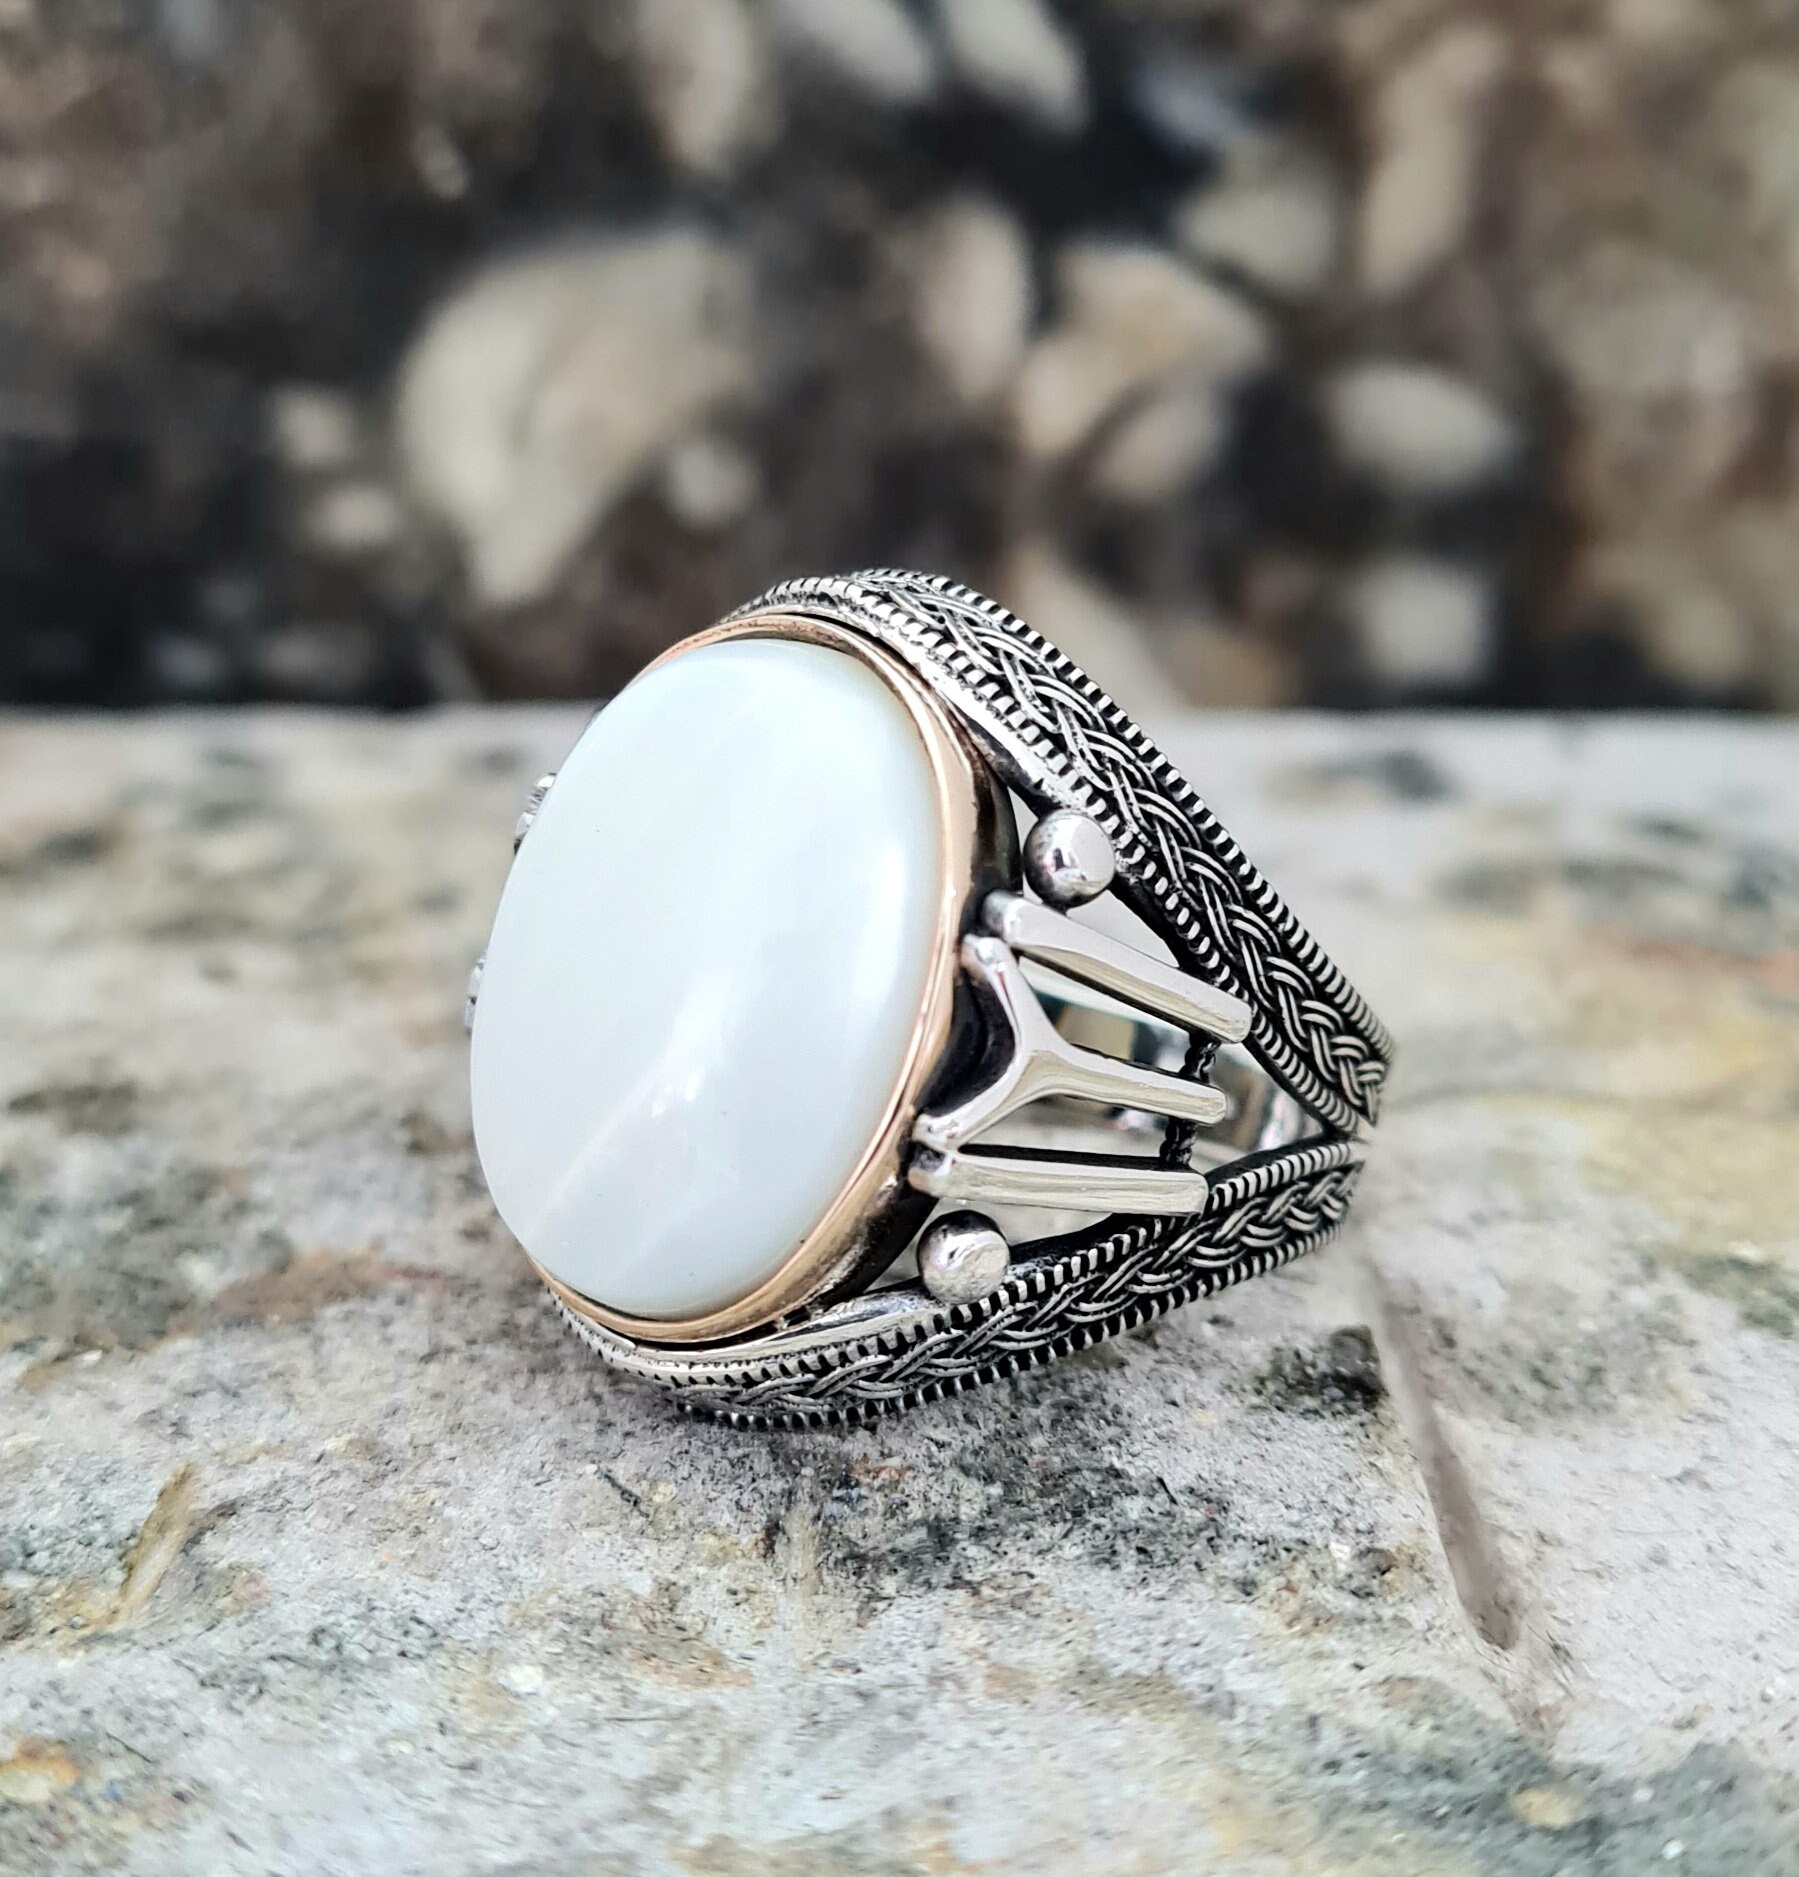 Certified Pearl (Moti) 7.25 cts Stunning Silver Ring for Men and Women